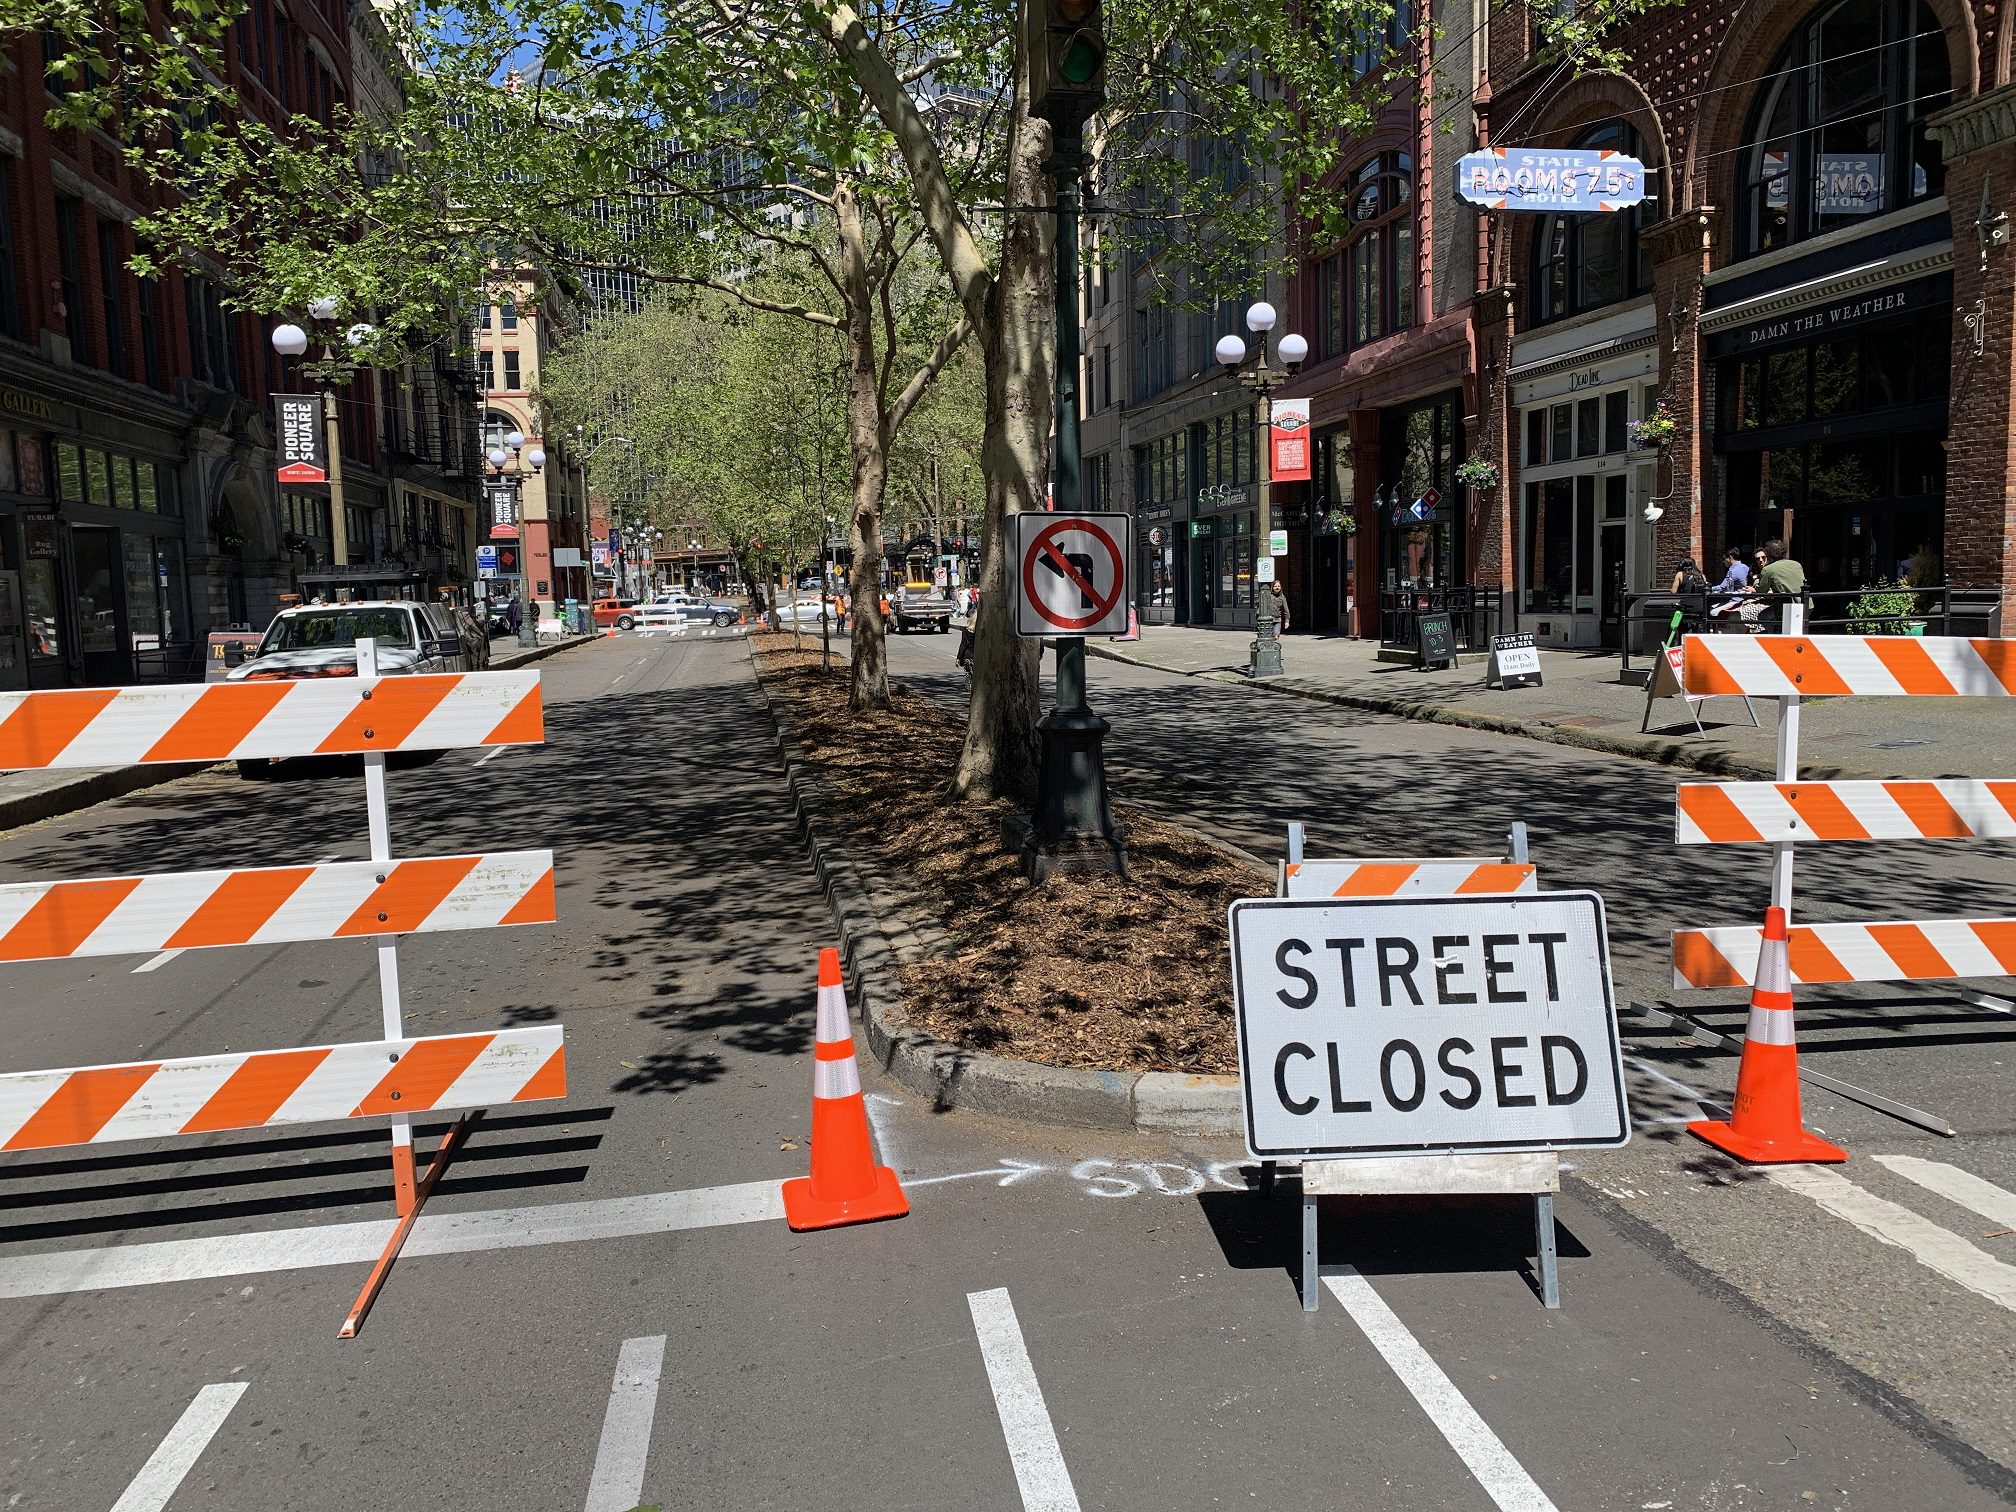 Sections of 1st Ave S were closed to traffic on Saturday, May 21 to keep everyone safe.